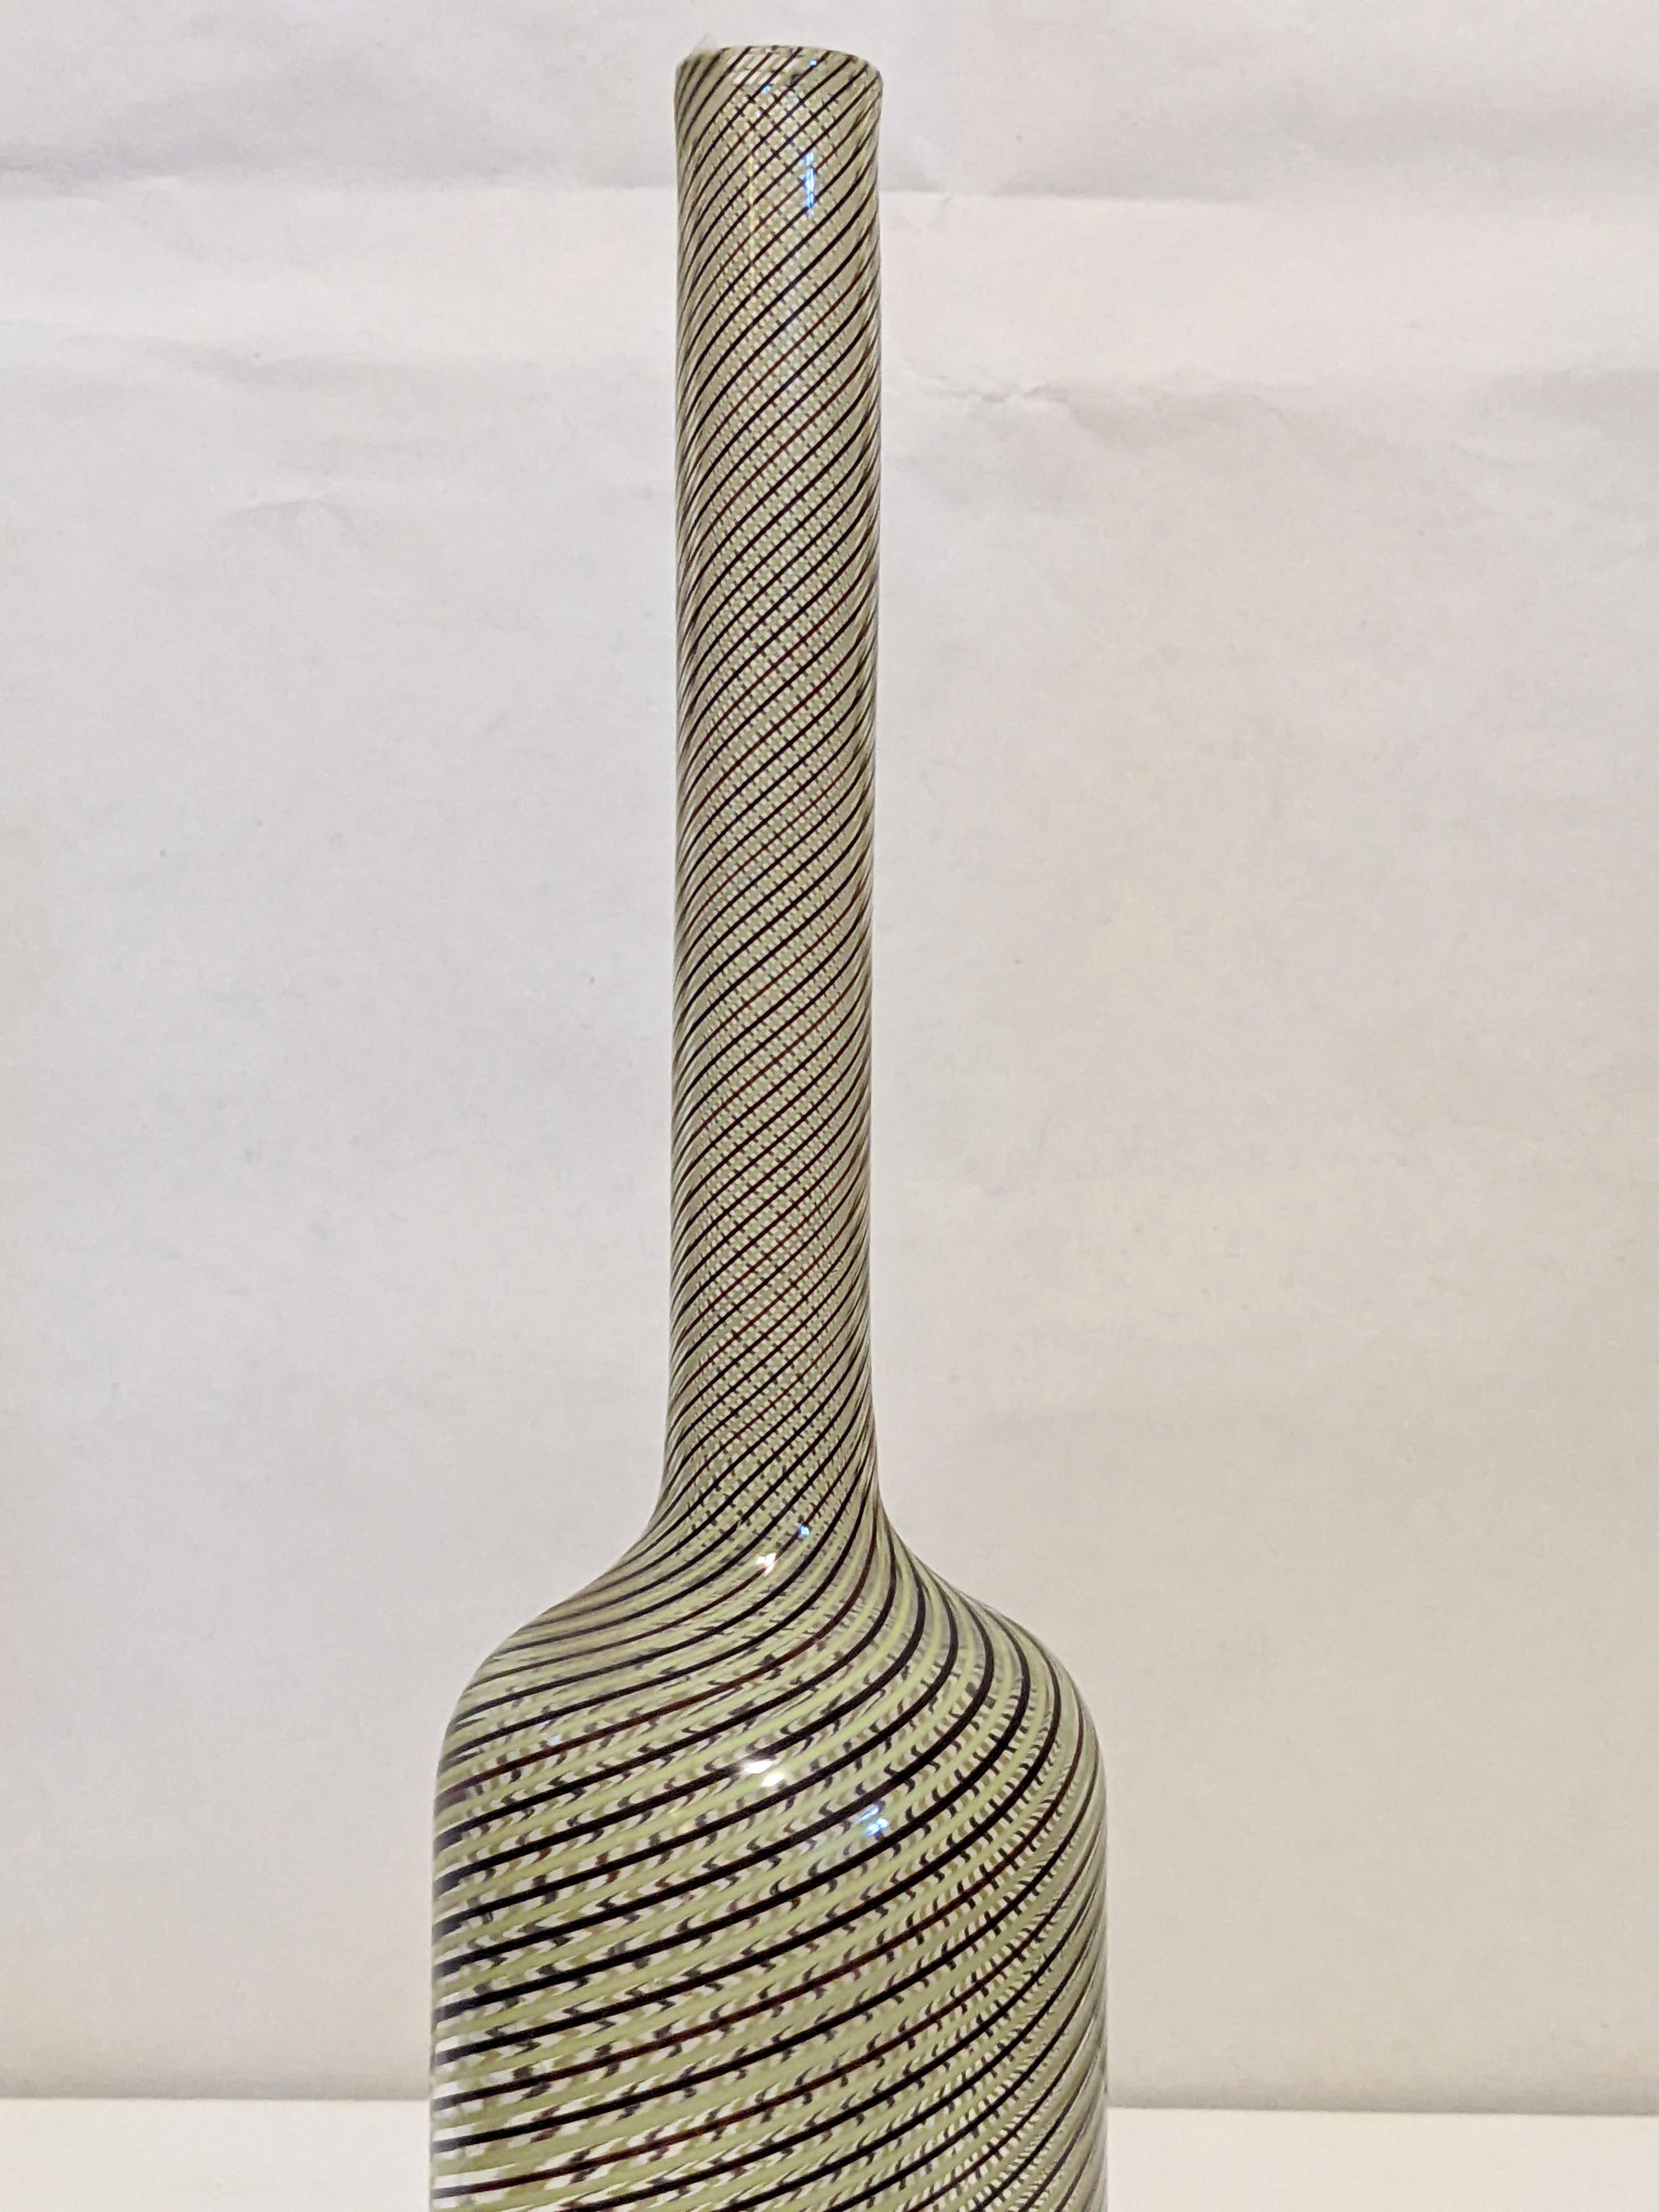 Lovely, period Venini Mezza filigrana bottle circa 1950's of spiraling threads in yellow and black on crystal with elongated neck, conical stopper, possibly by Paolo Venini or Gio Ponti for Venini. 14